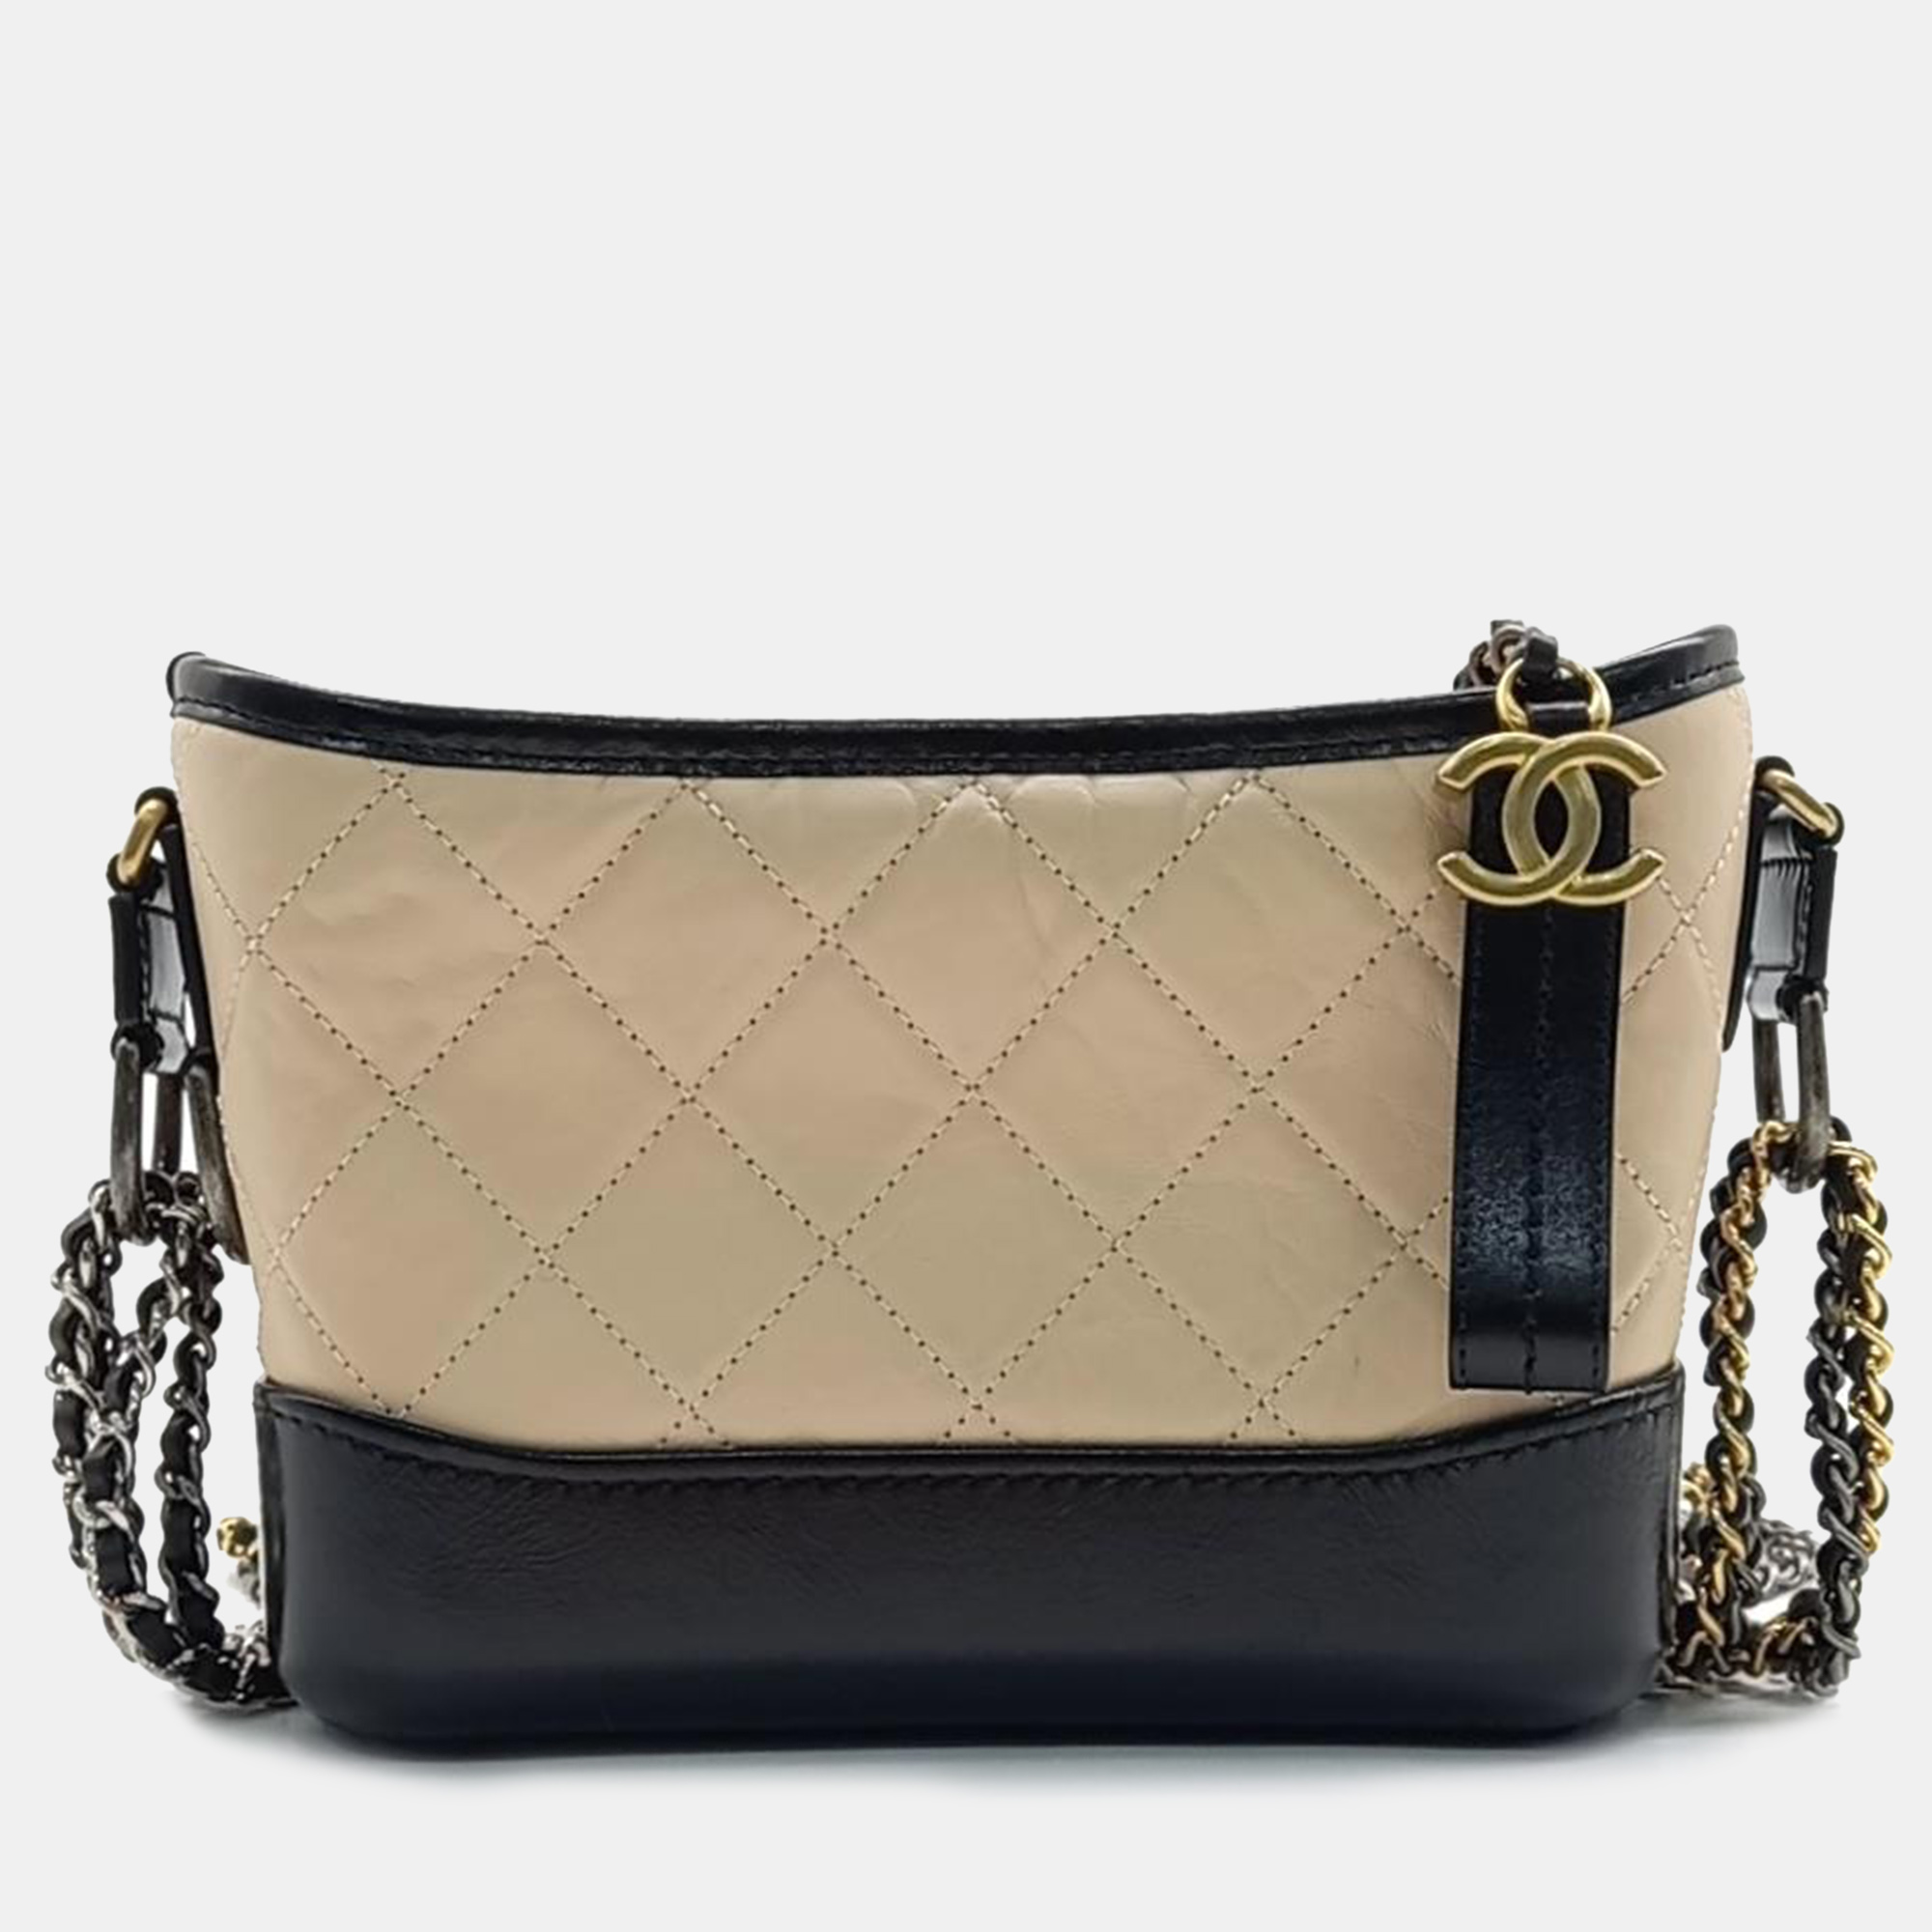 Chanel black/beige leather small gabrielle hobo bag